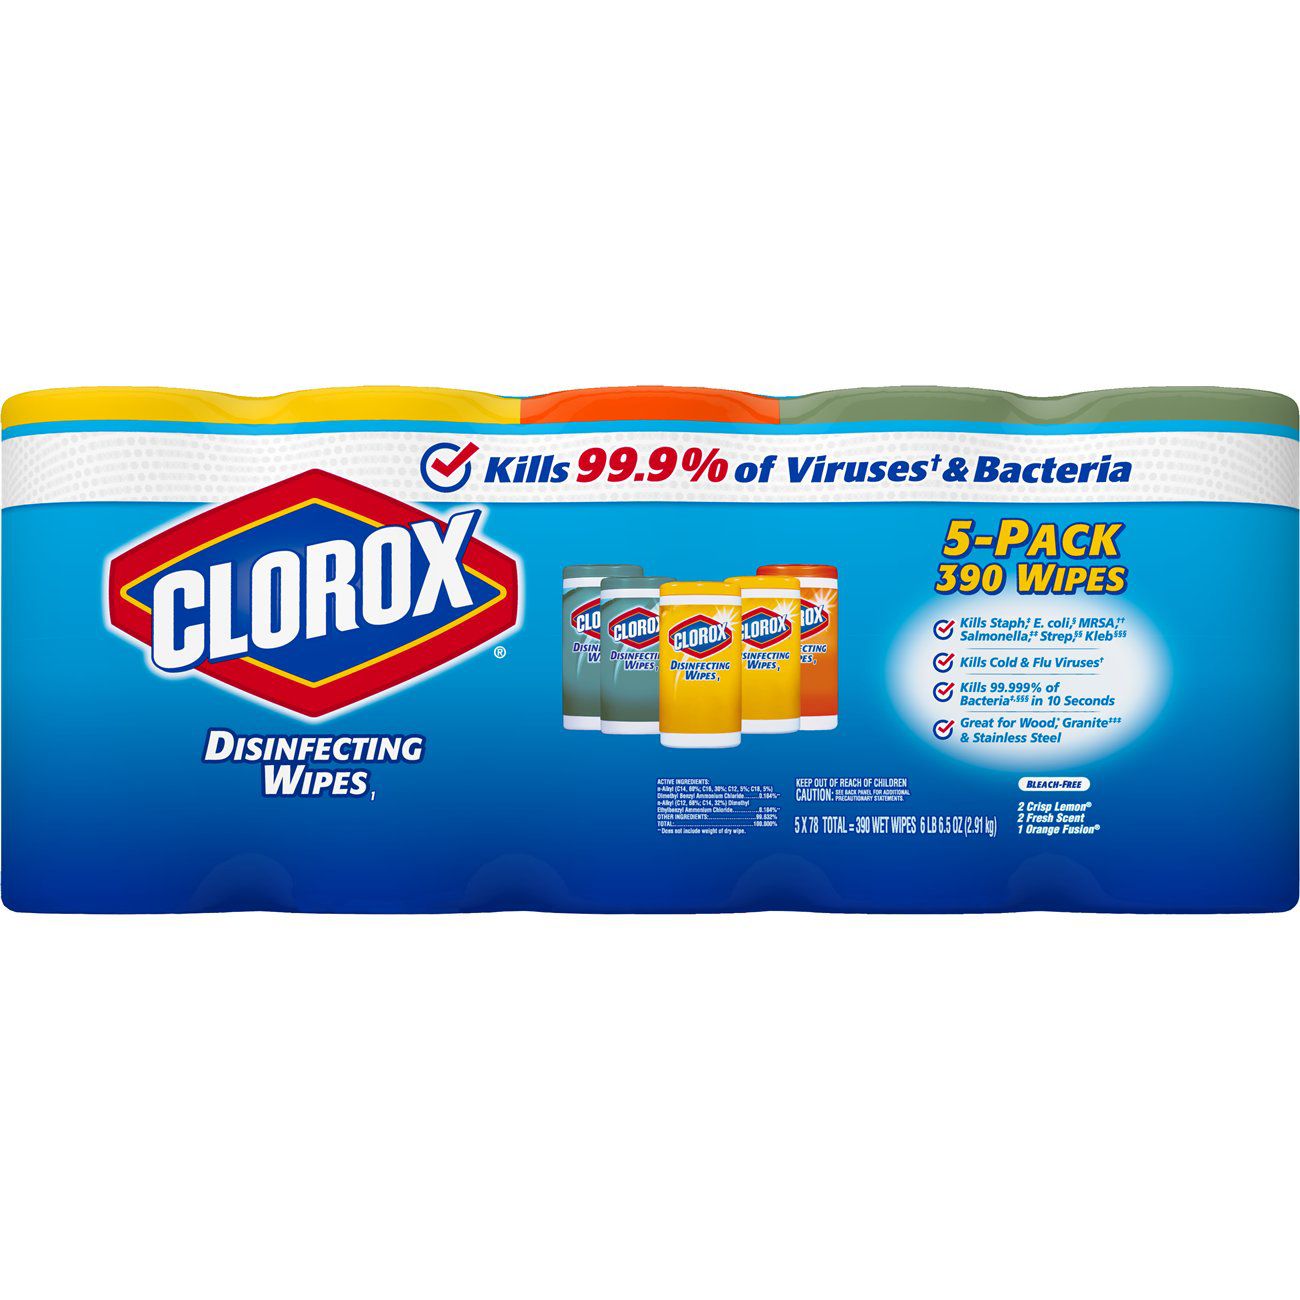 Clorox Disinfecting Wipes, Cleaning Wipes, Crisp Lemon, 75 Count, Pack of 6  (Package may vary) (Package